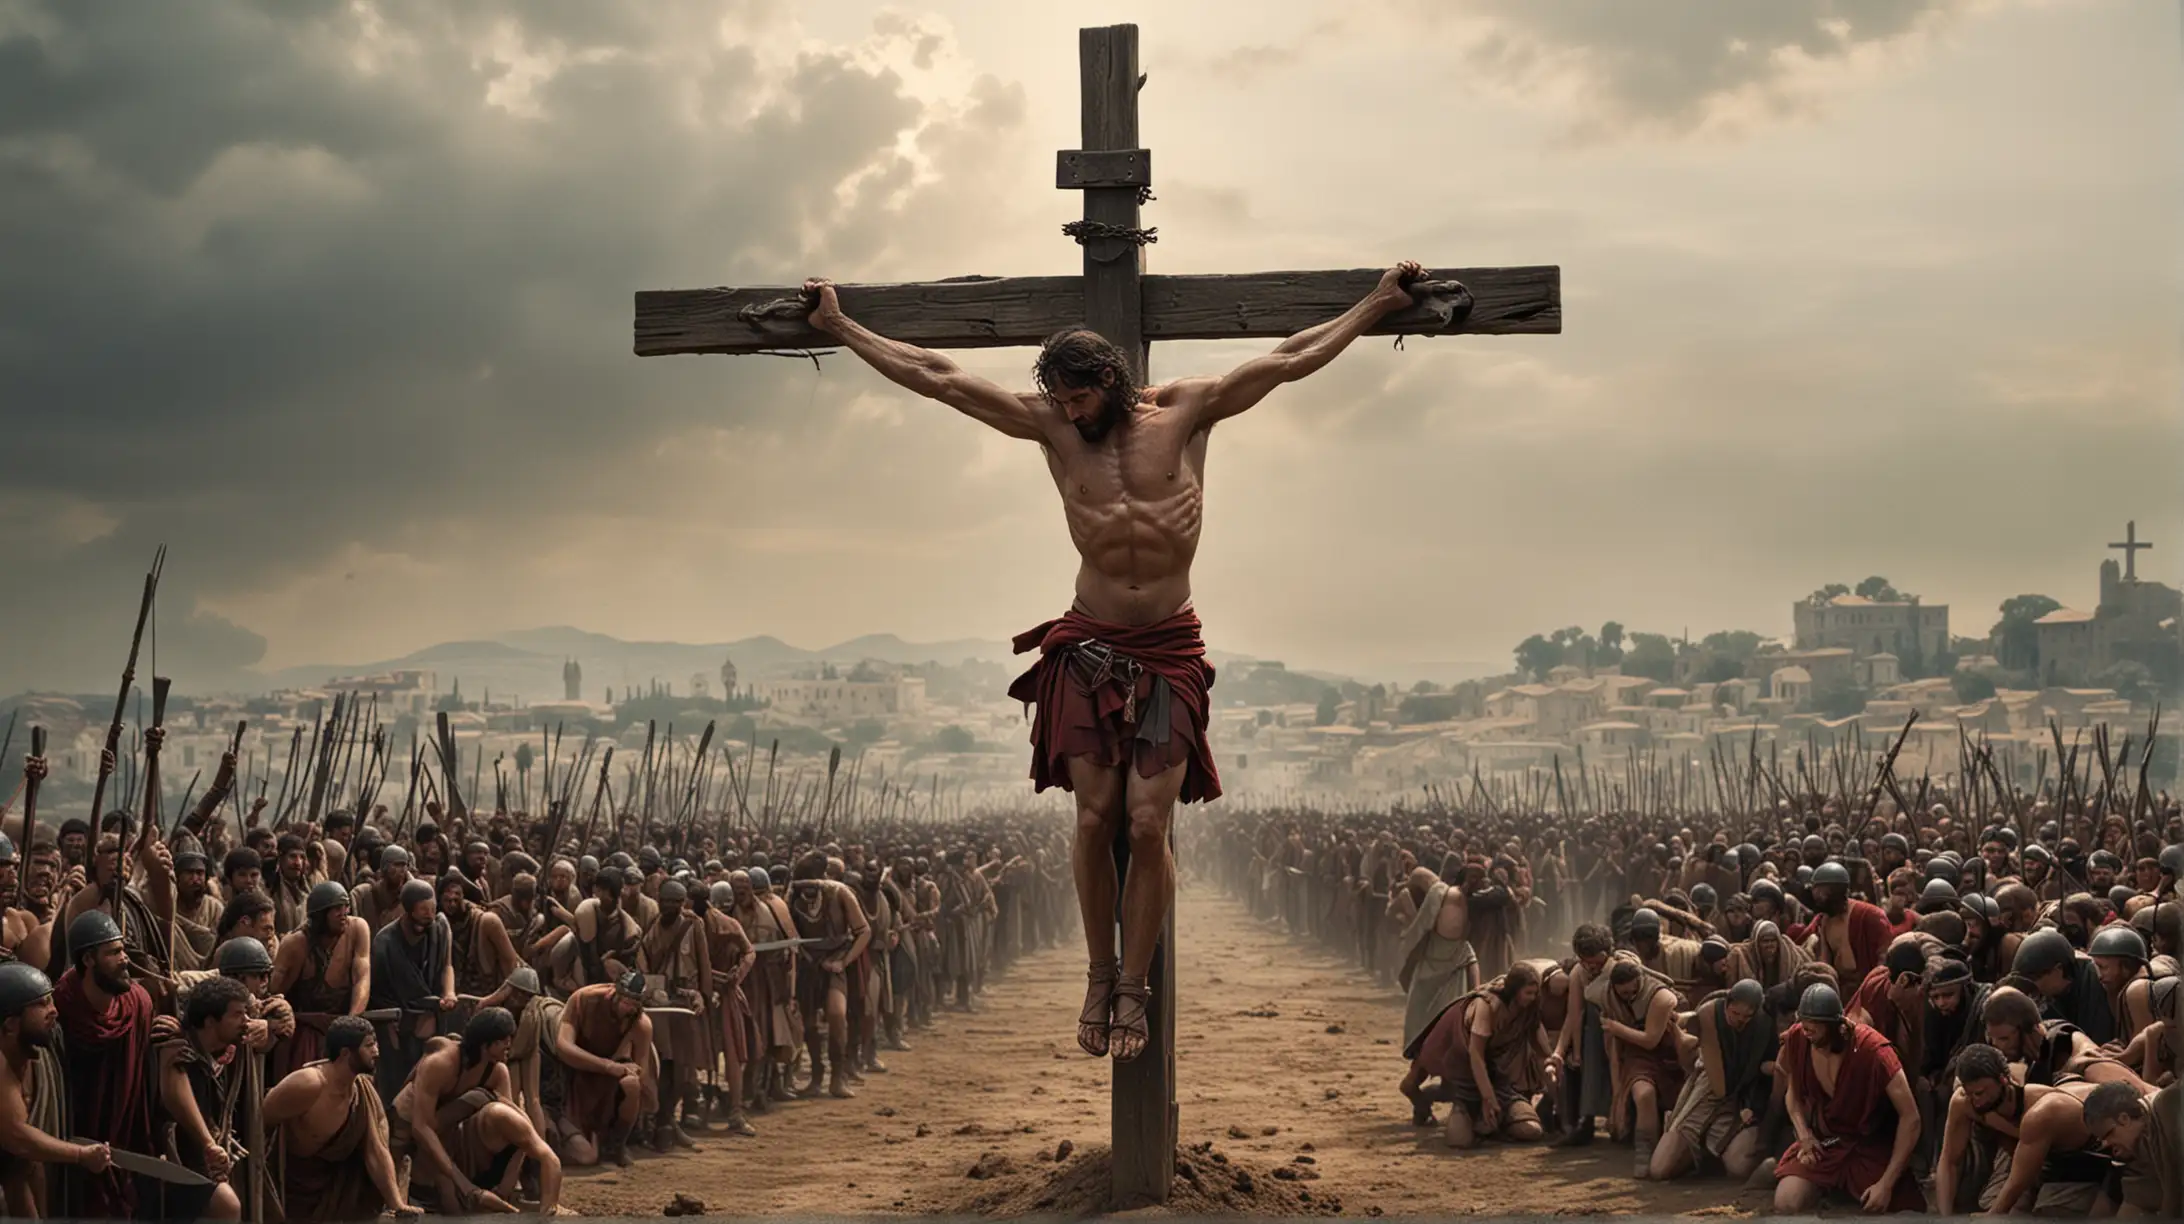  a narrative from the perspective of a Roman soldier witnessing the crucifixion of Jesus, 
